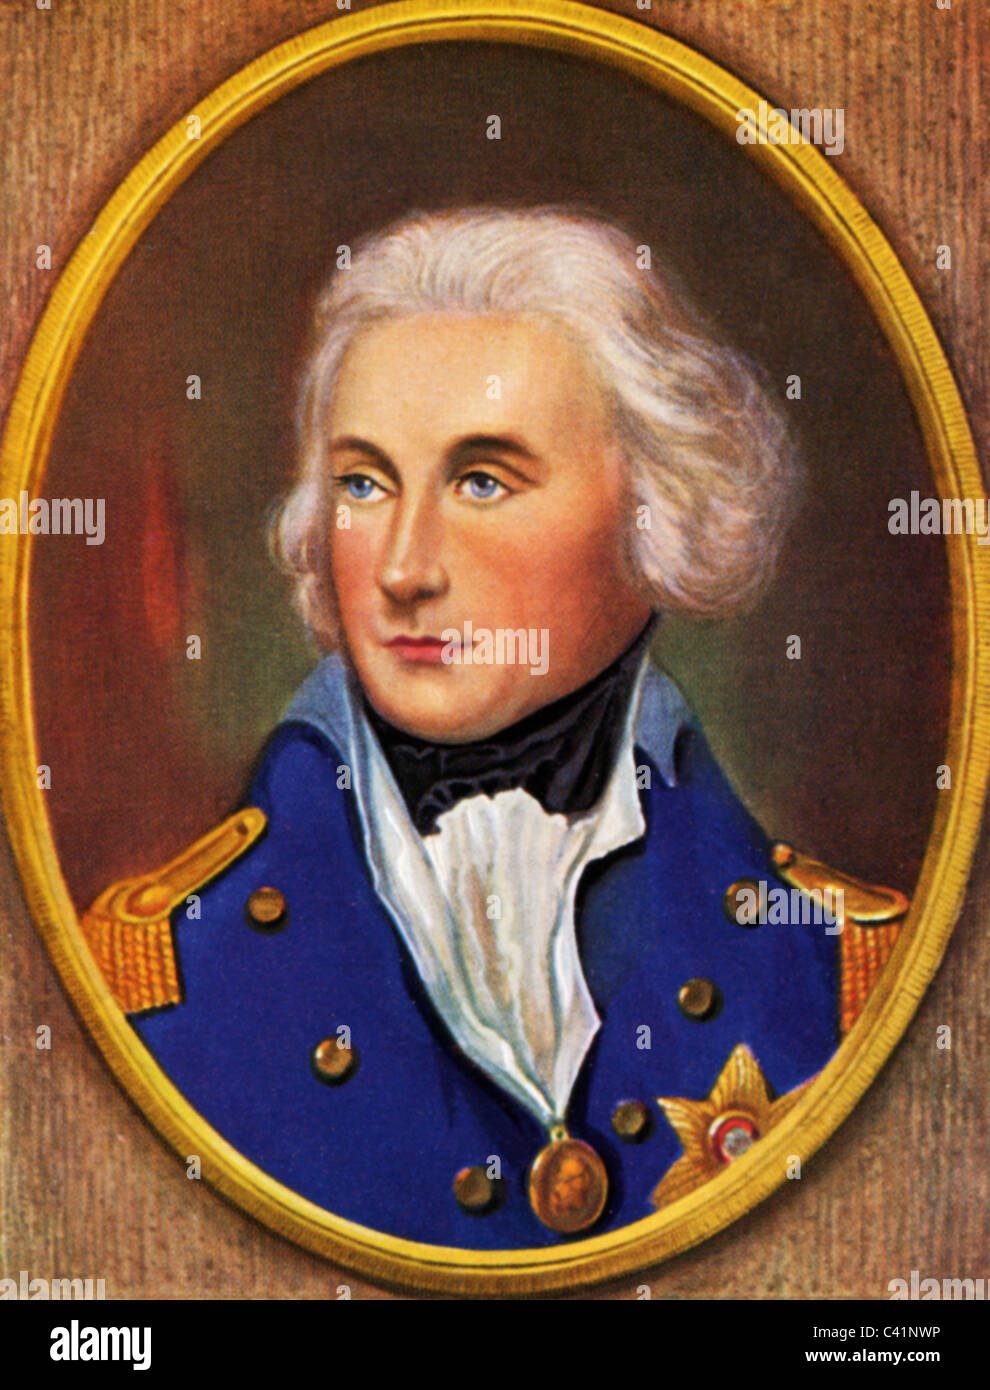 Nelson, Horatio, 29.9.1758 - 21.10.1805, British admiral, portrait,  colour print after miniature by William Essex, circa 1795, cigarette card, Germany, 1933, , Stock Photo